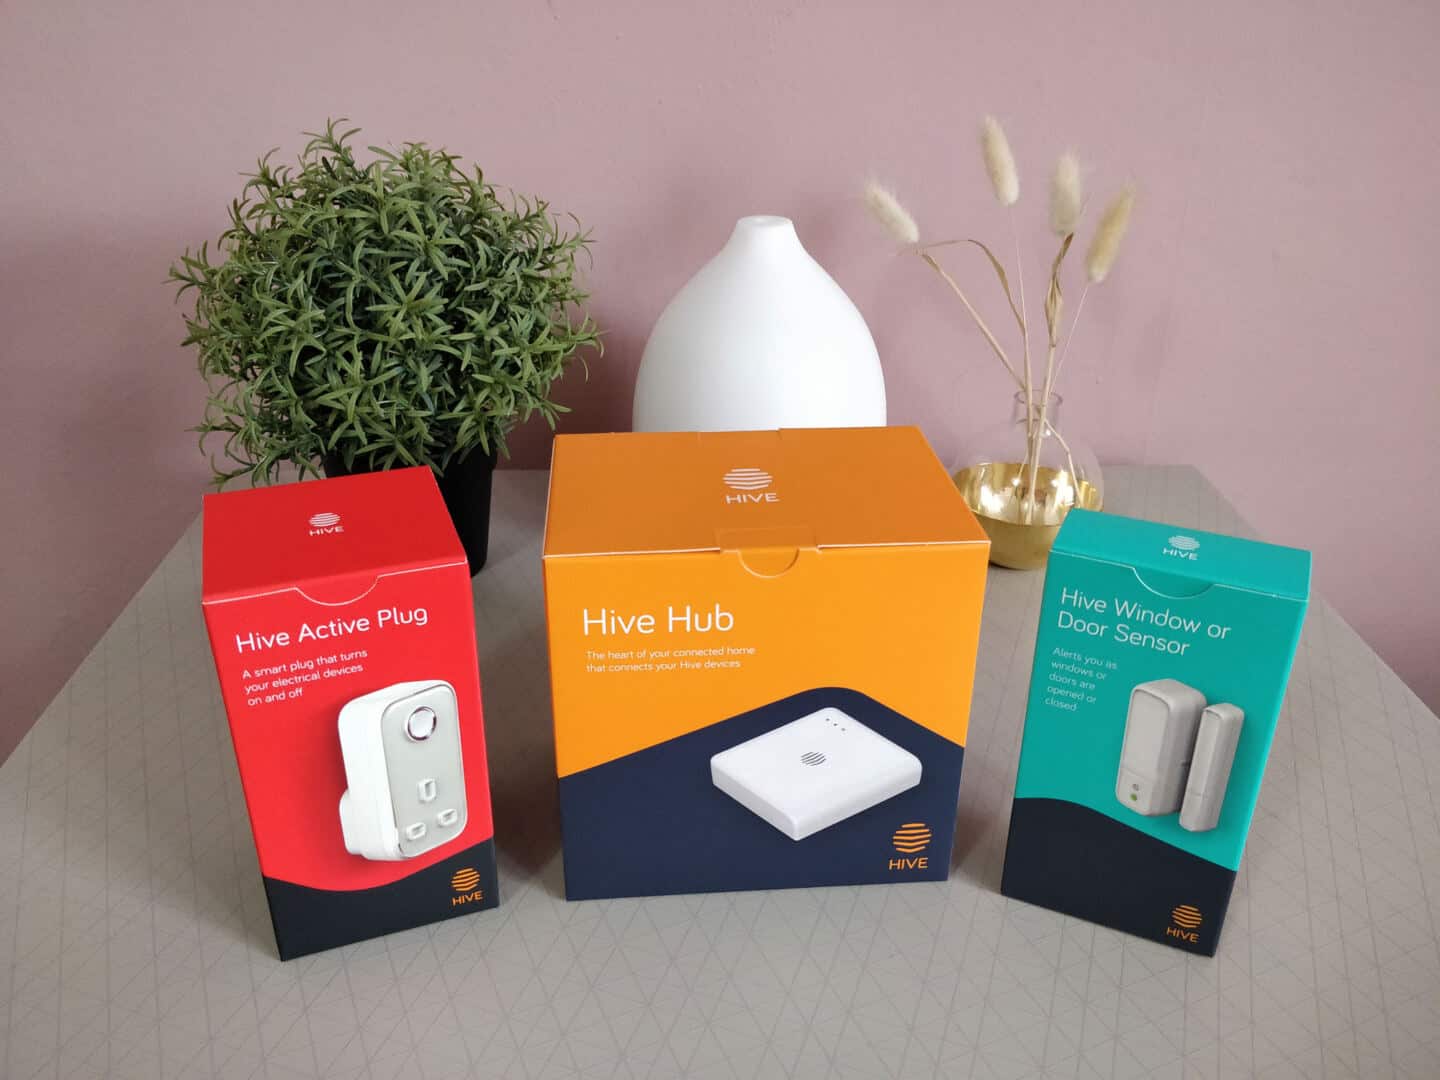 Hive smart devices can be used to create a smart office of a smart home